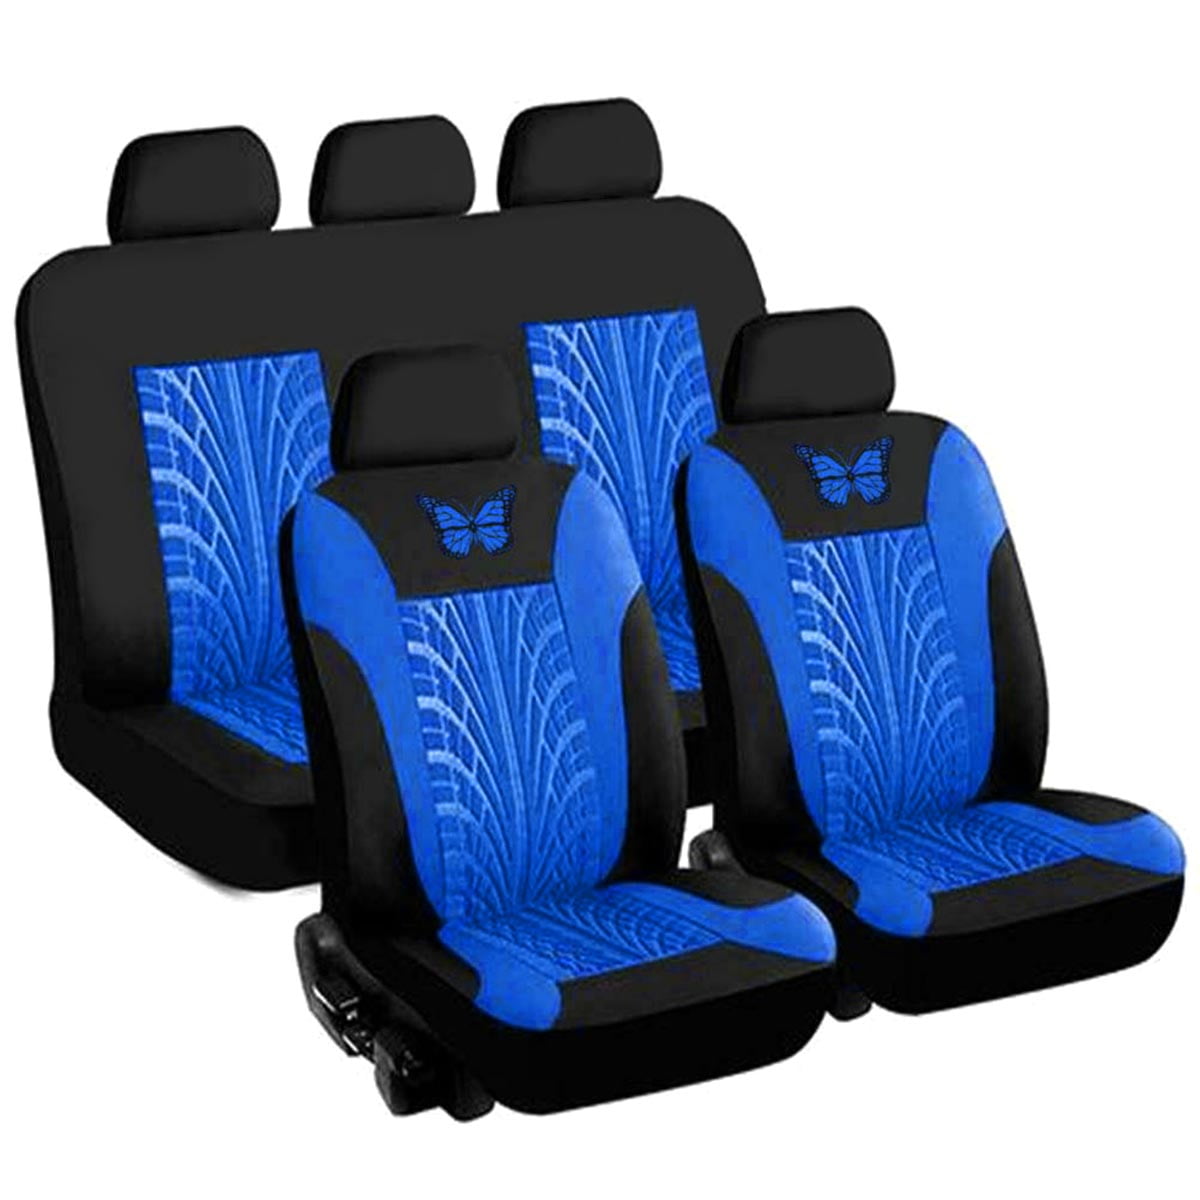 9PCS Full Set Universal Car Front Rear Seat Headrest Covers Protector For SUV 